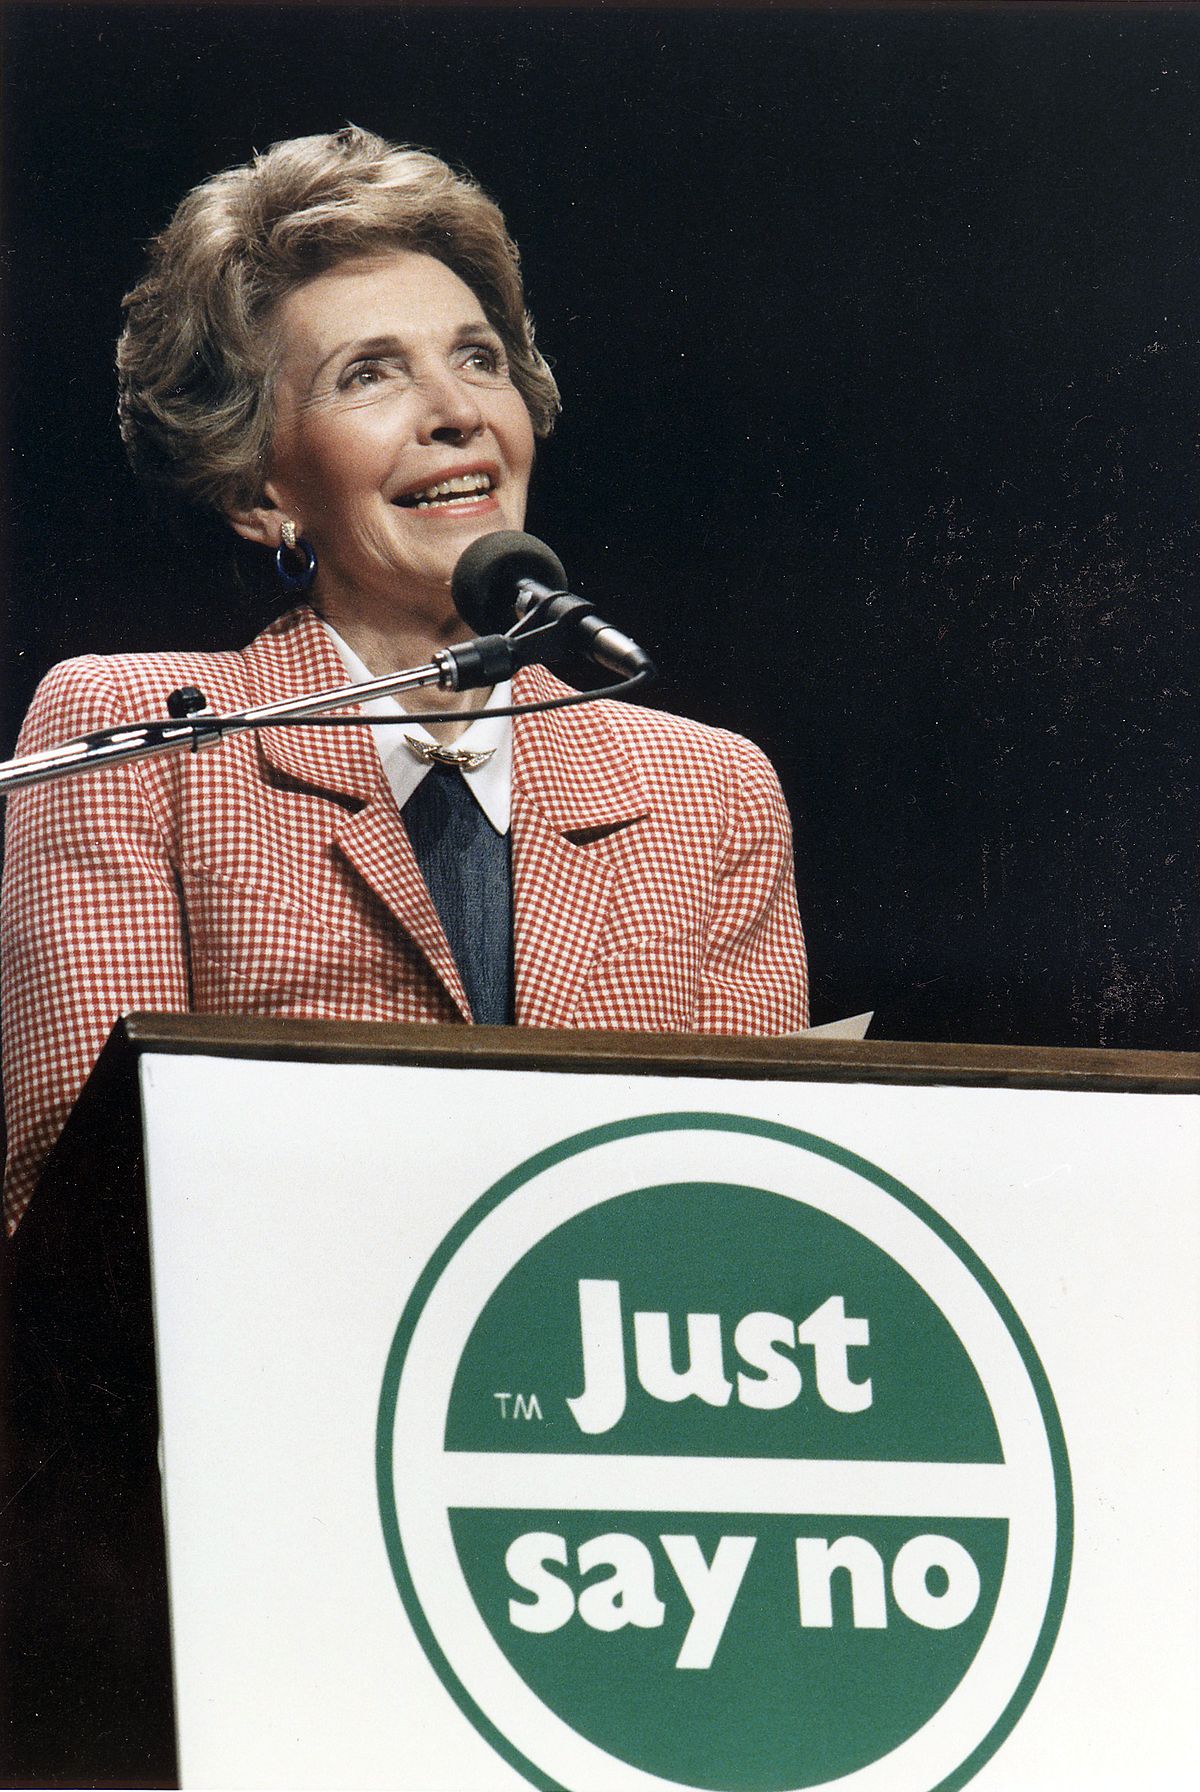 1200px-Photograph_of_Mrs._Reagan_speaking_at_a_%22Just_Say_No%22_Rally_in_Los_Angeles_-_NARA_-_198584.jpg